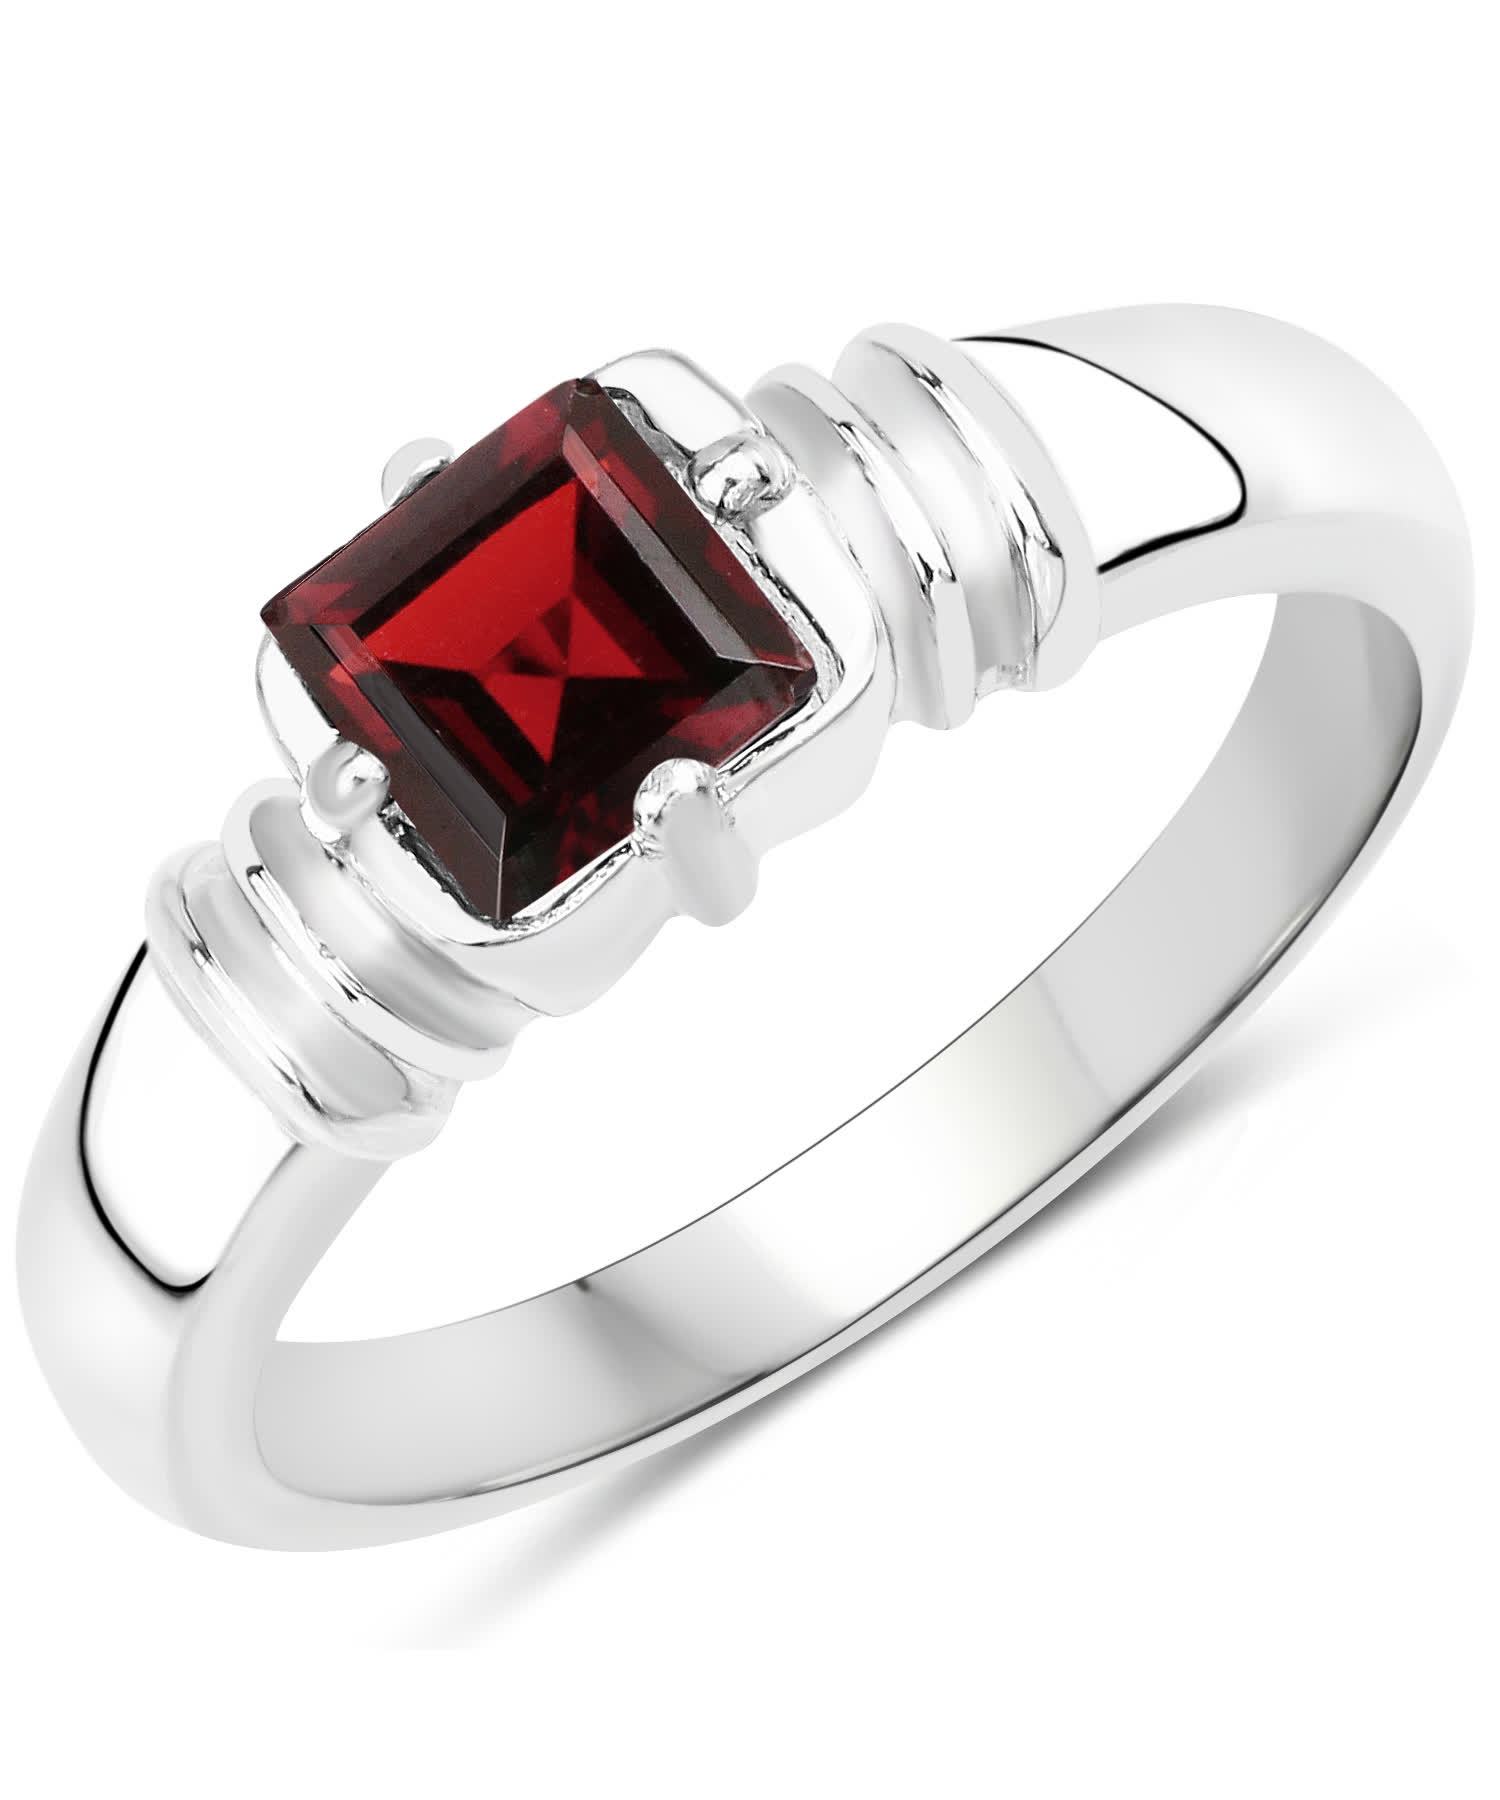 0.90ctw Natural Garnet Rhodium Plated 925 Sterling Silver Ring View 1